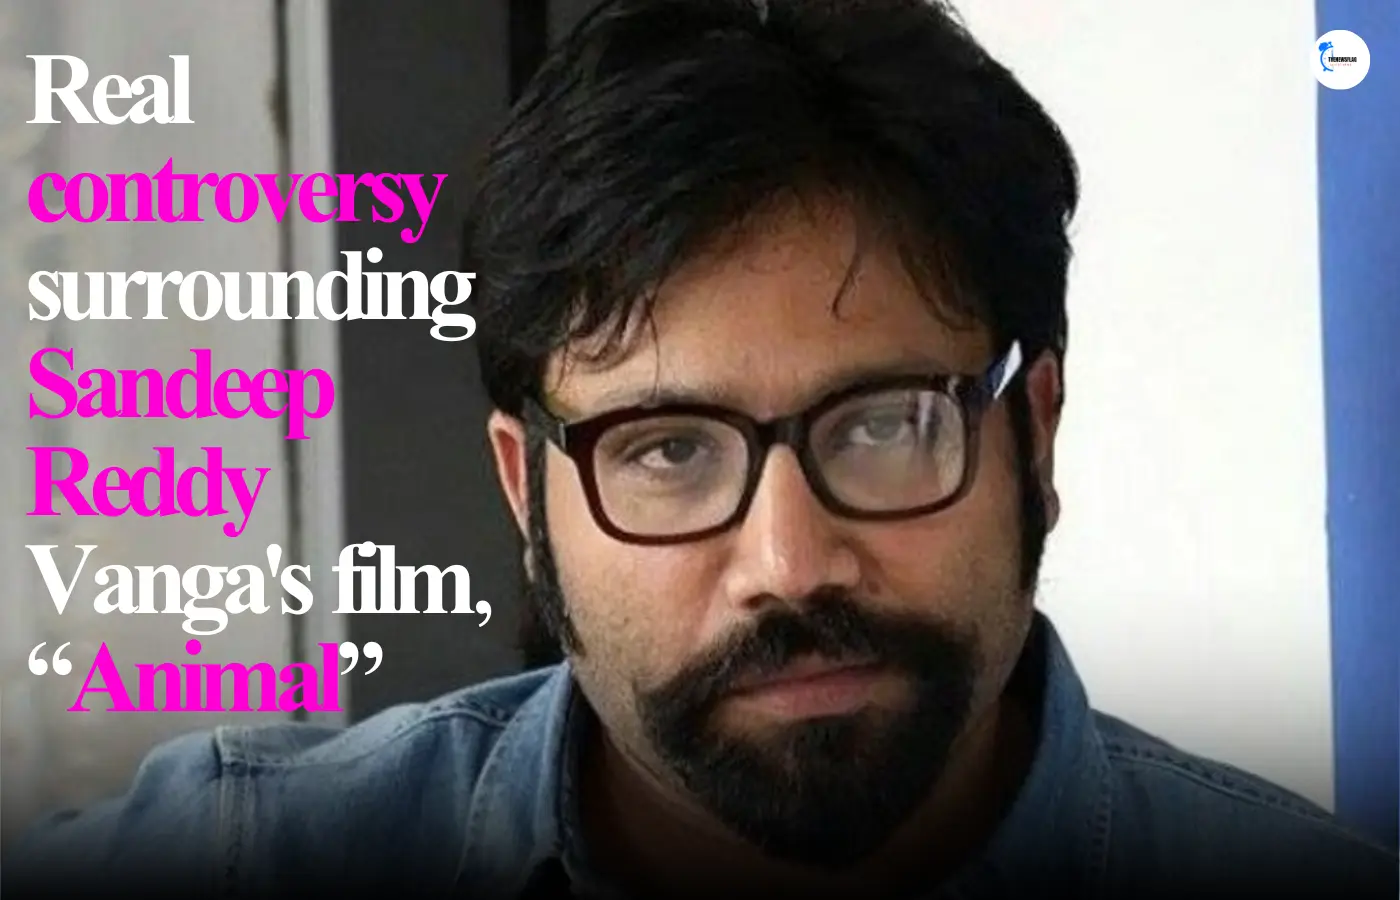 What is the real controversy surrounding Sandeep Reddy Vanga's film, Animal?